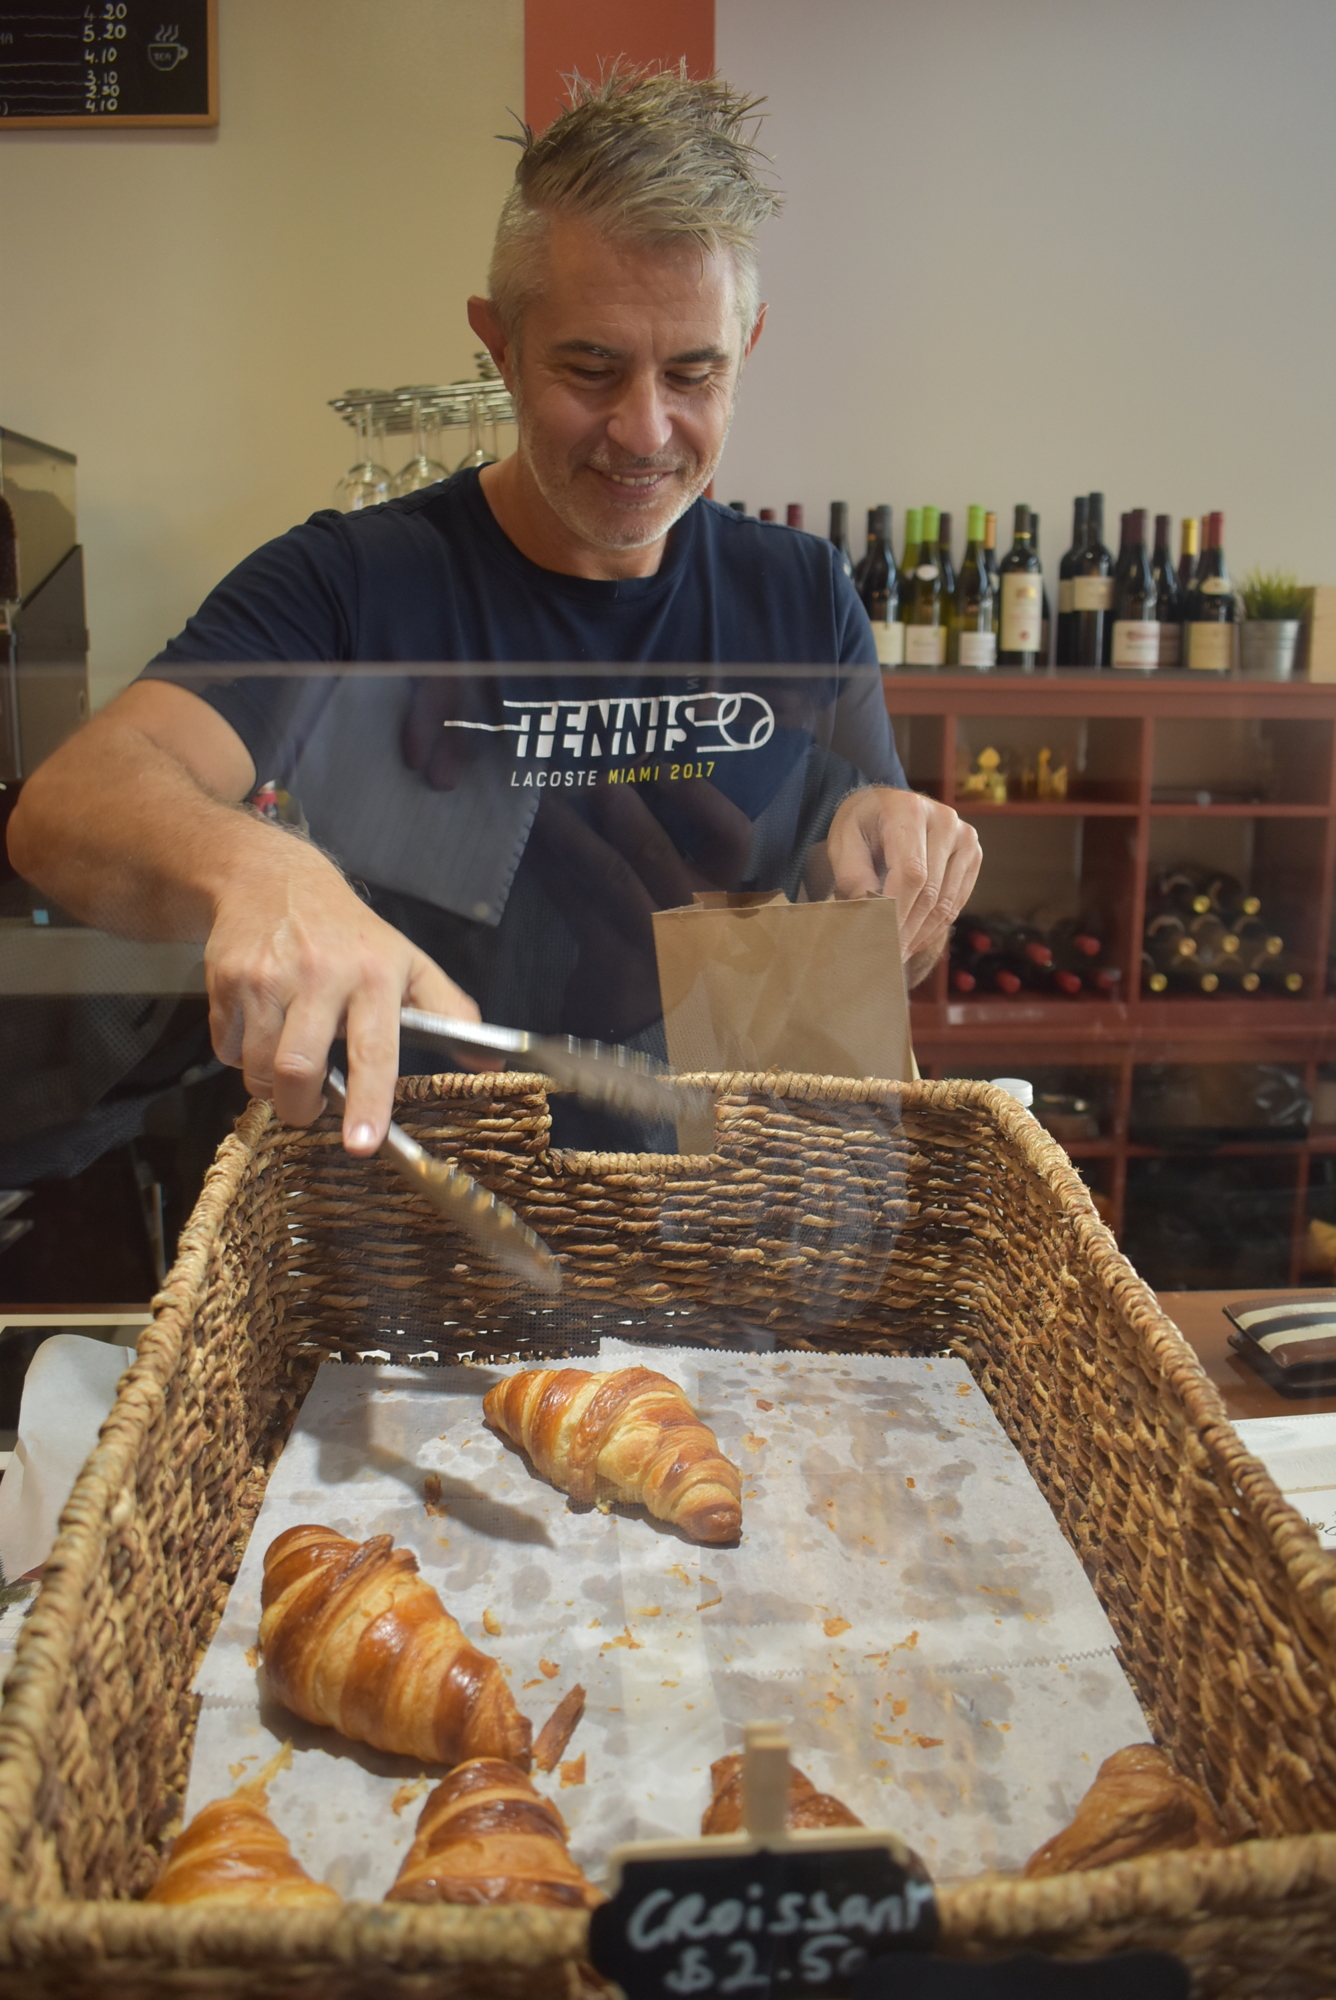 Jean Dandonneau selects a croissant to put in a to-go bag. Since becoming Mademoiselle Paris, the Dandonneaus have added new items to the menu, such as maple bacon croissants.